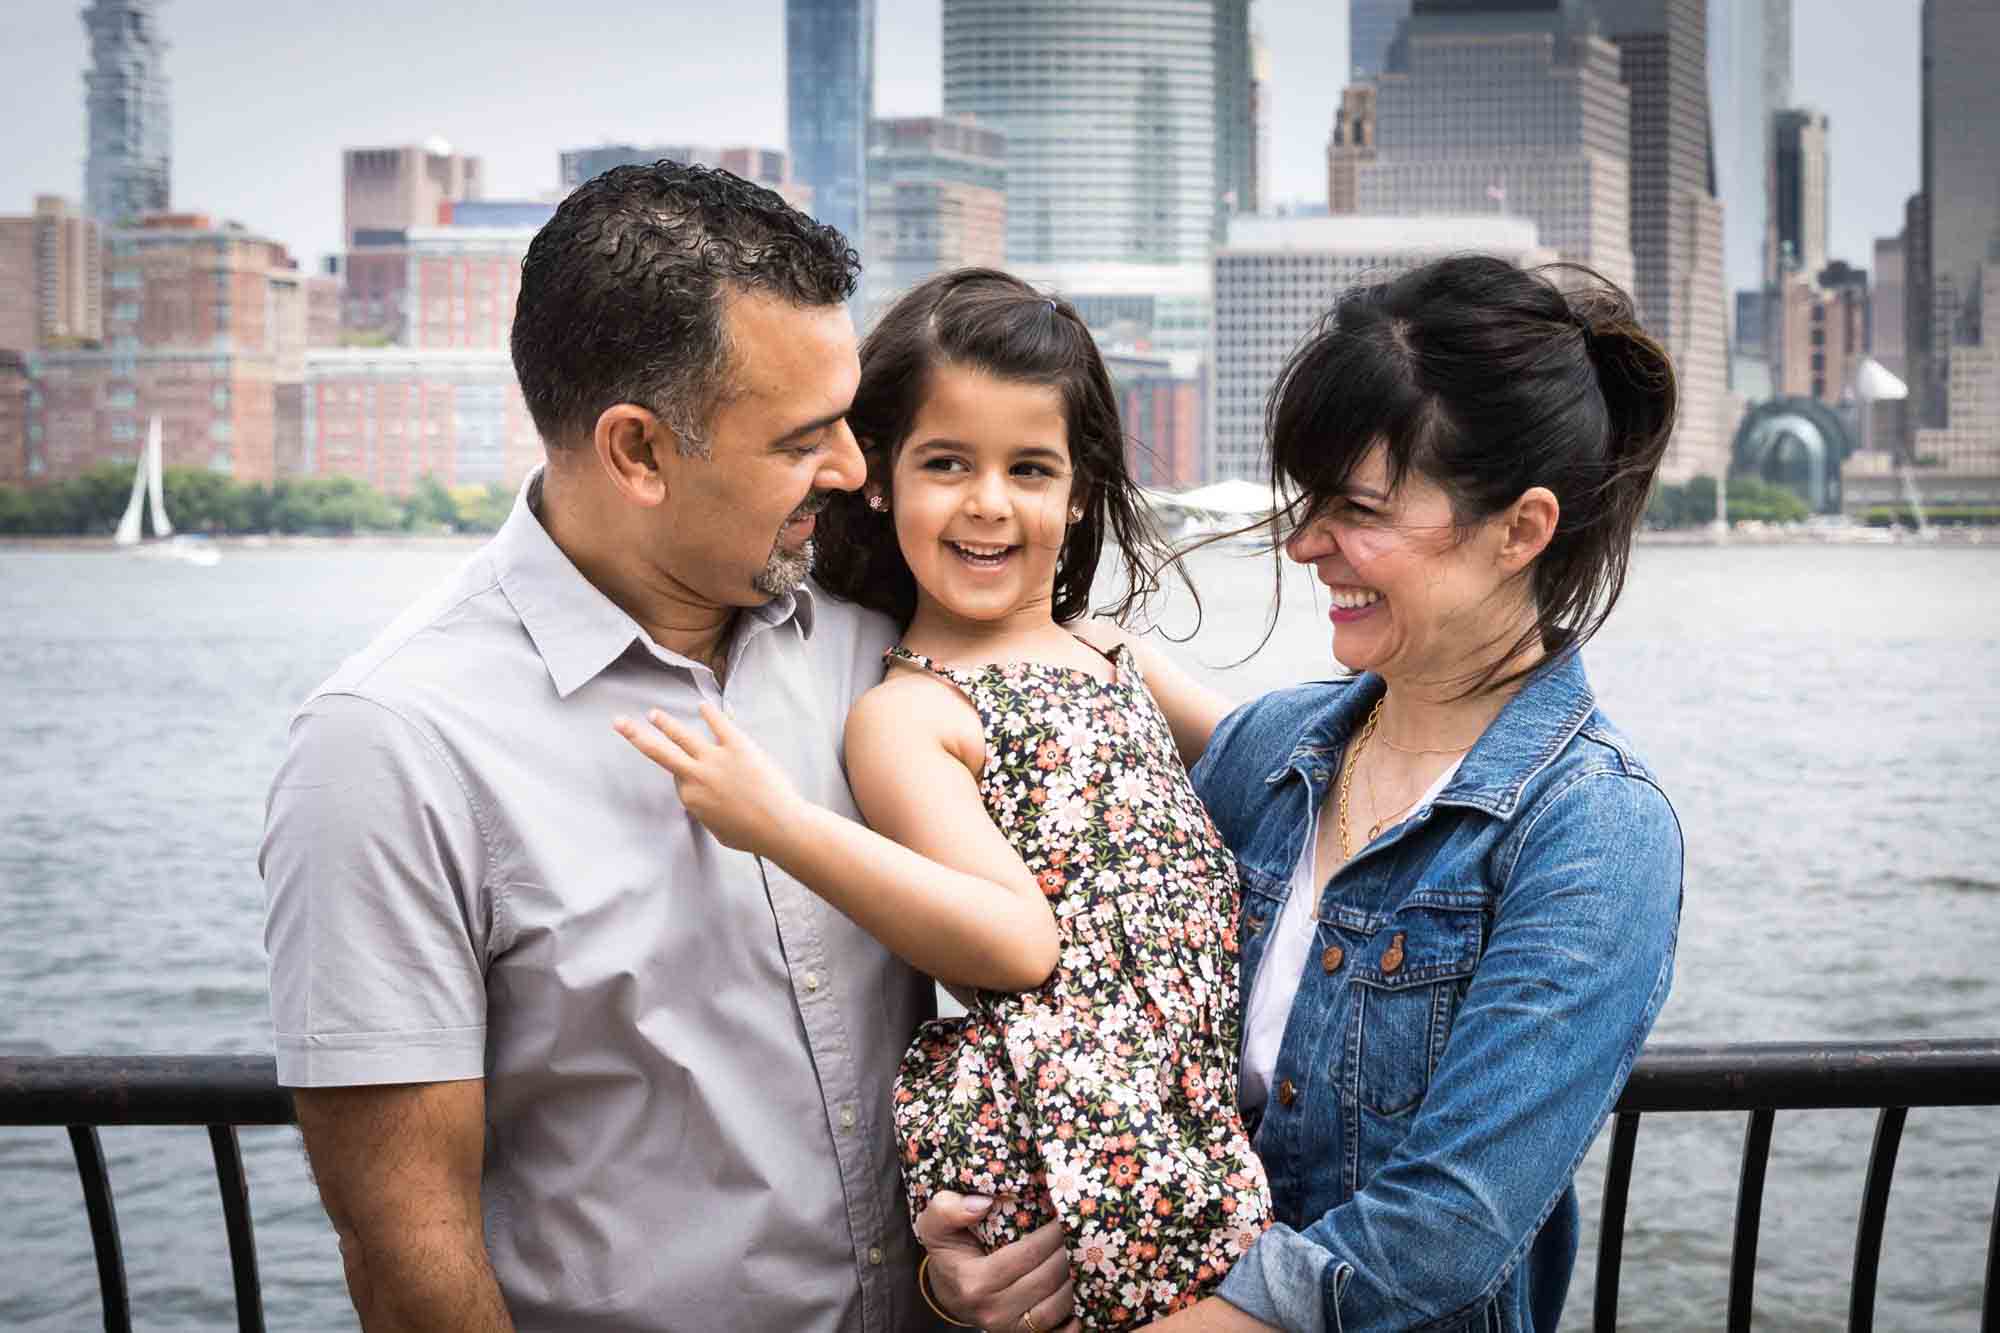 Little girl smiling while being held by parents in front of NYC skyline